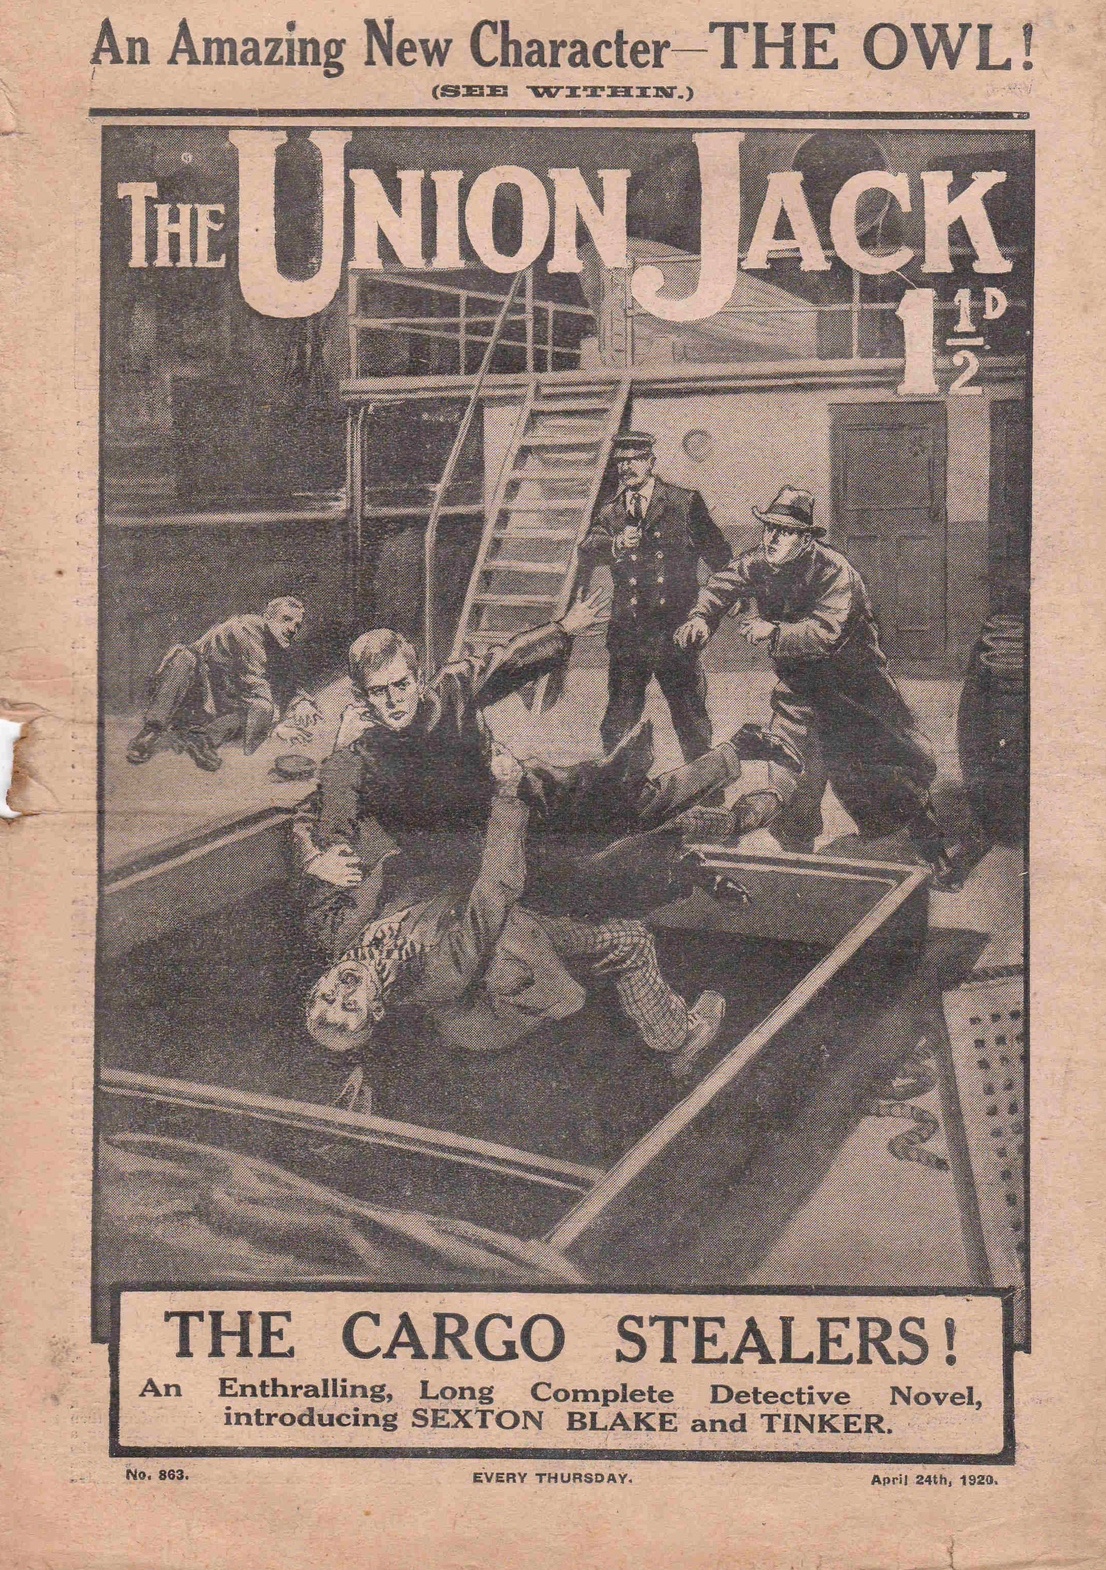 THE CARGO STEALERS